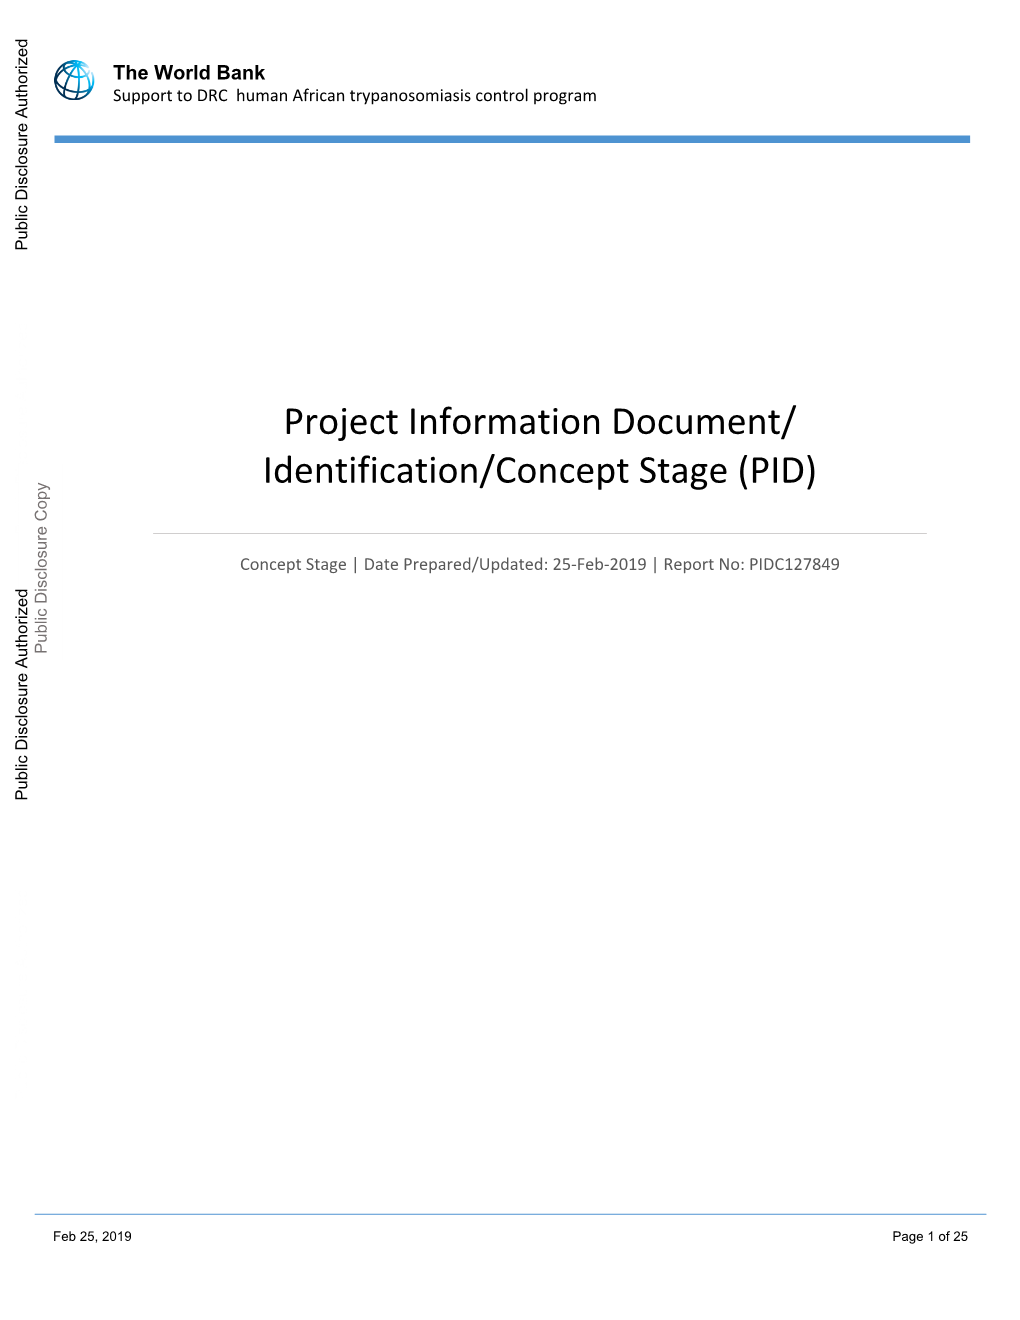 Project Information Document (PID)